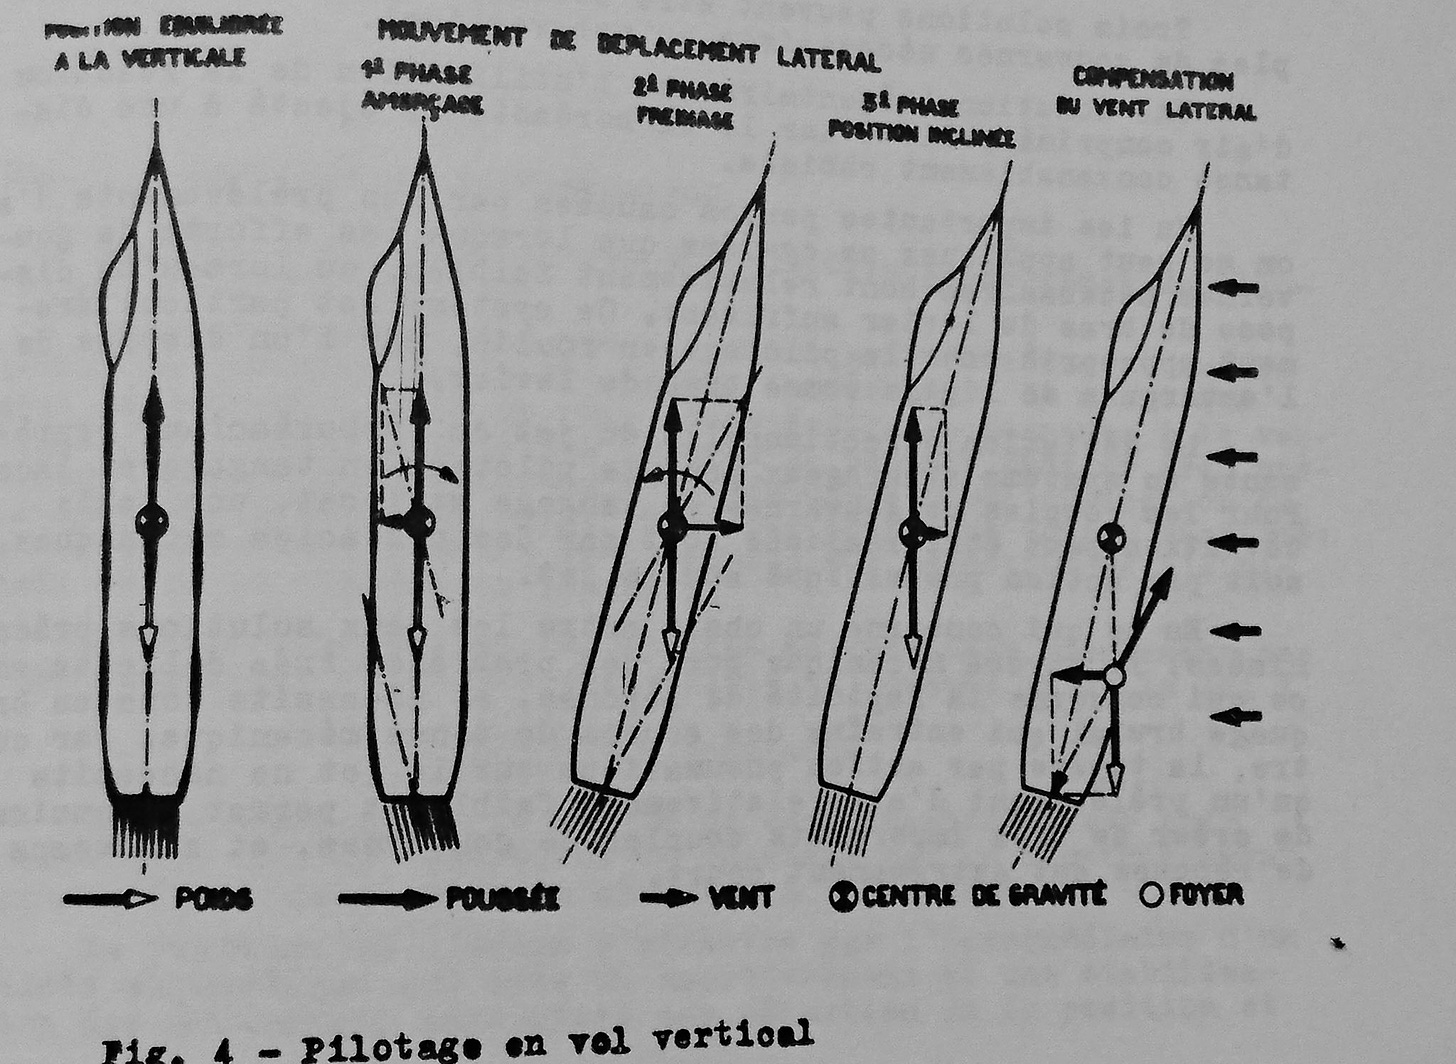 yves morier on Twitter: "French Tail Sitters Atar Volant and Coléoptère.  Part 1 I found in the proceedings of the 2nd European Aeronautical Congress  in 1956 as collected by Dr JH Greidanus